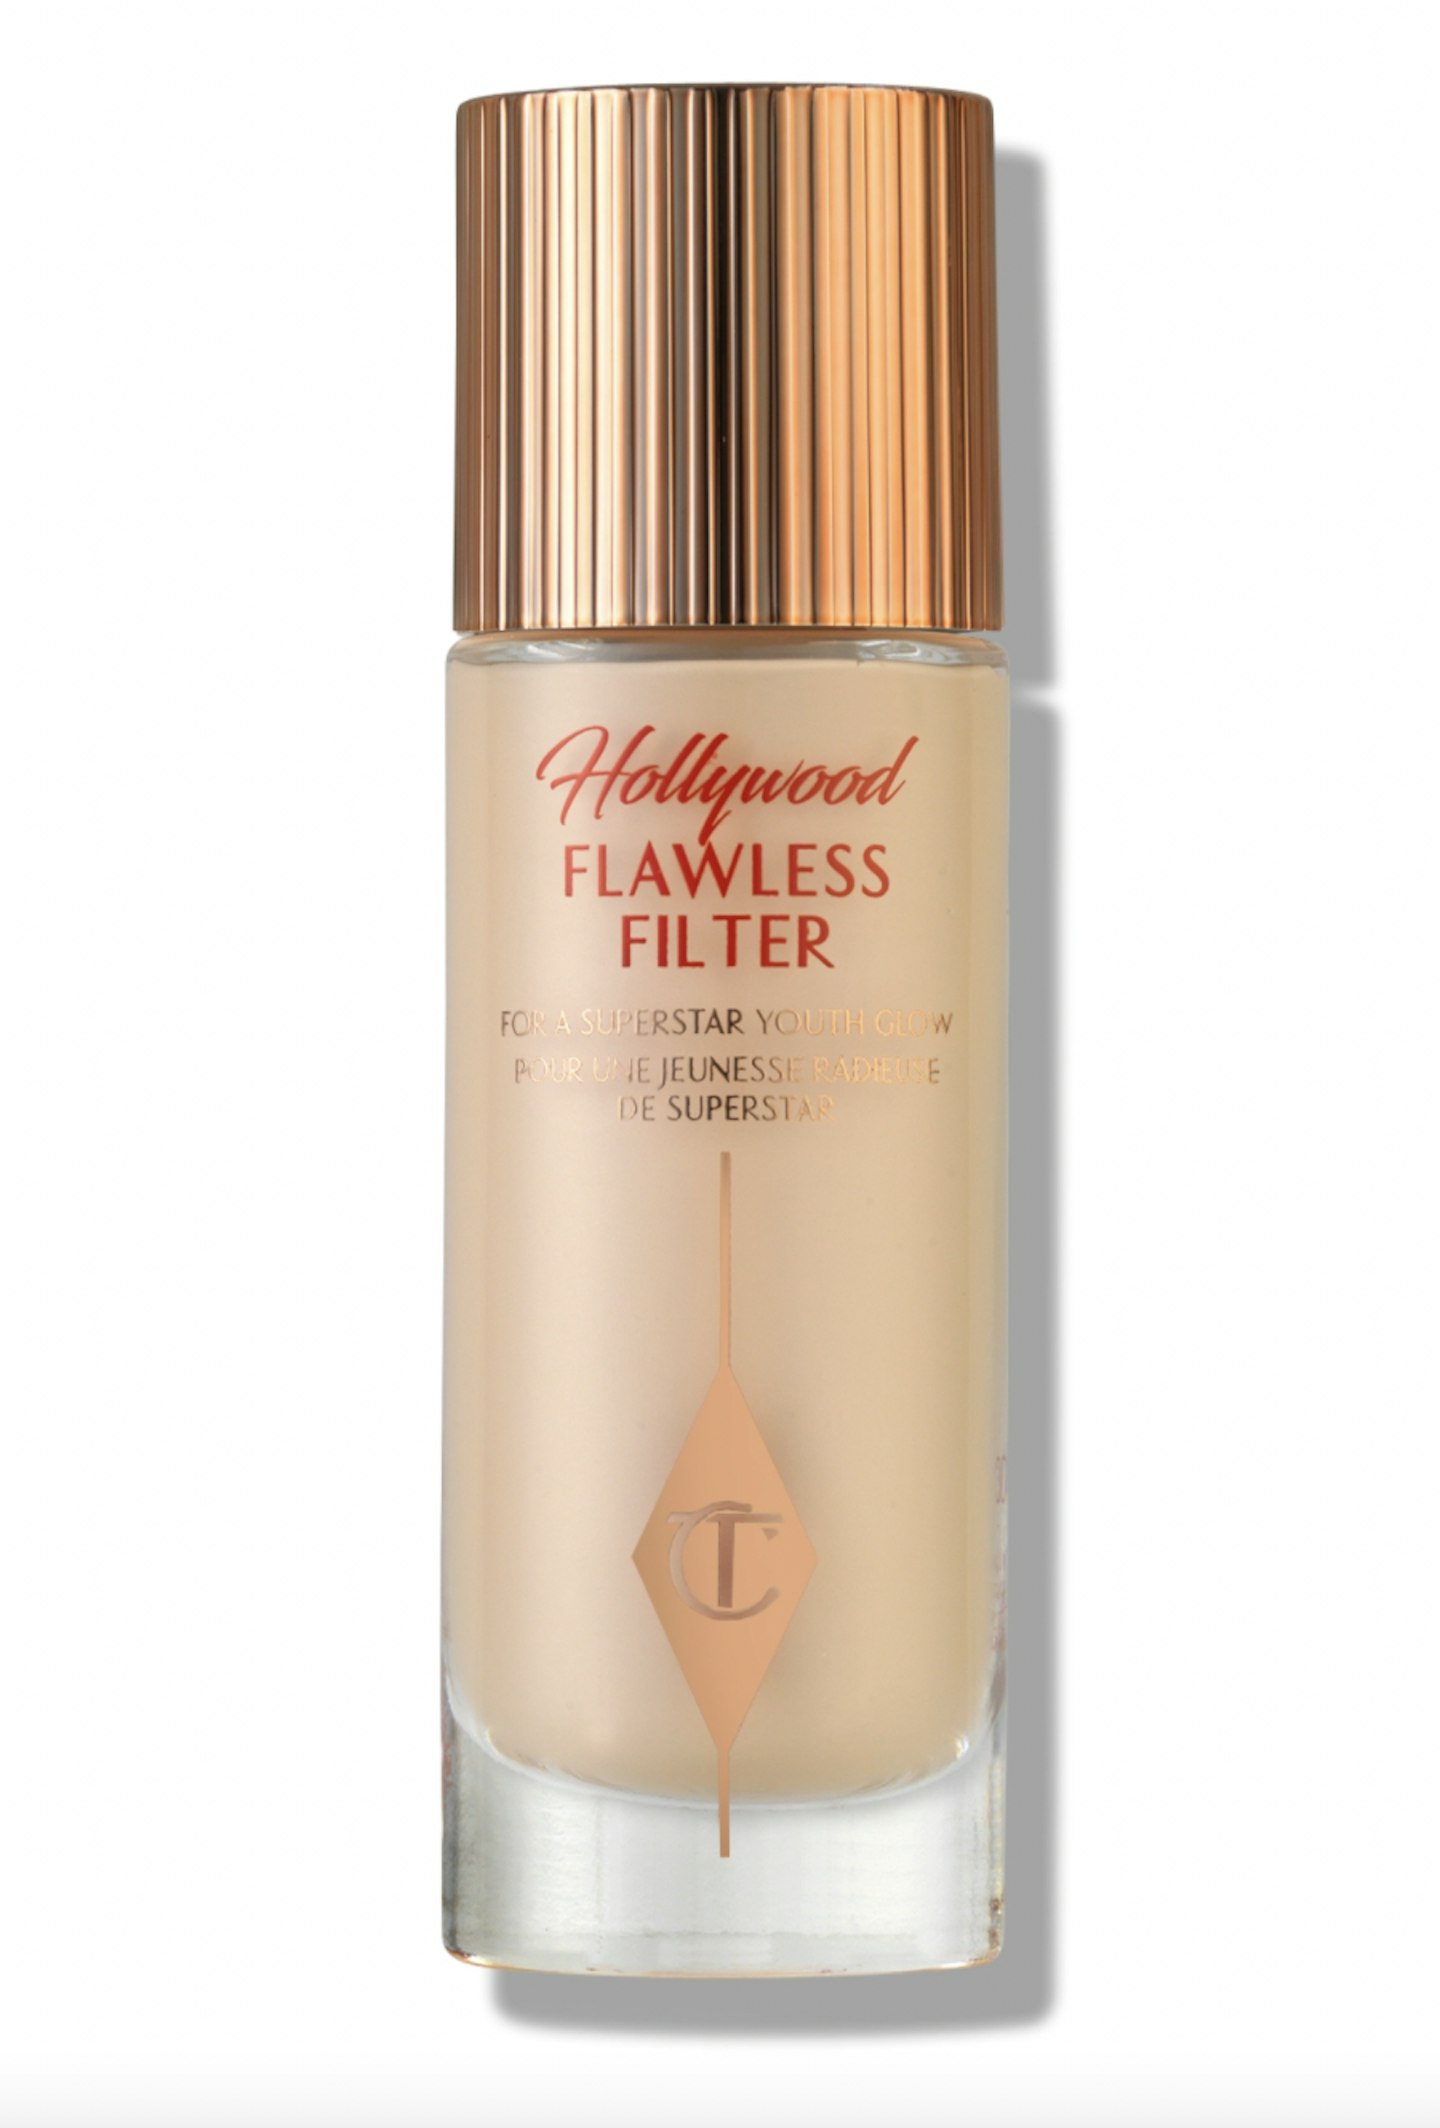 Charlotte Tilbury Hollywood Flawless Filter, £34